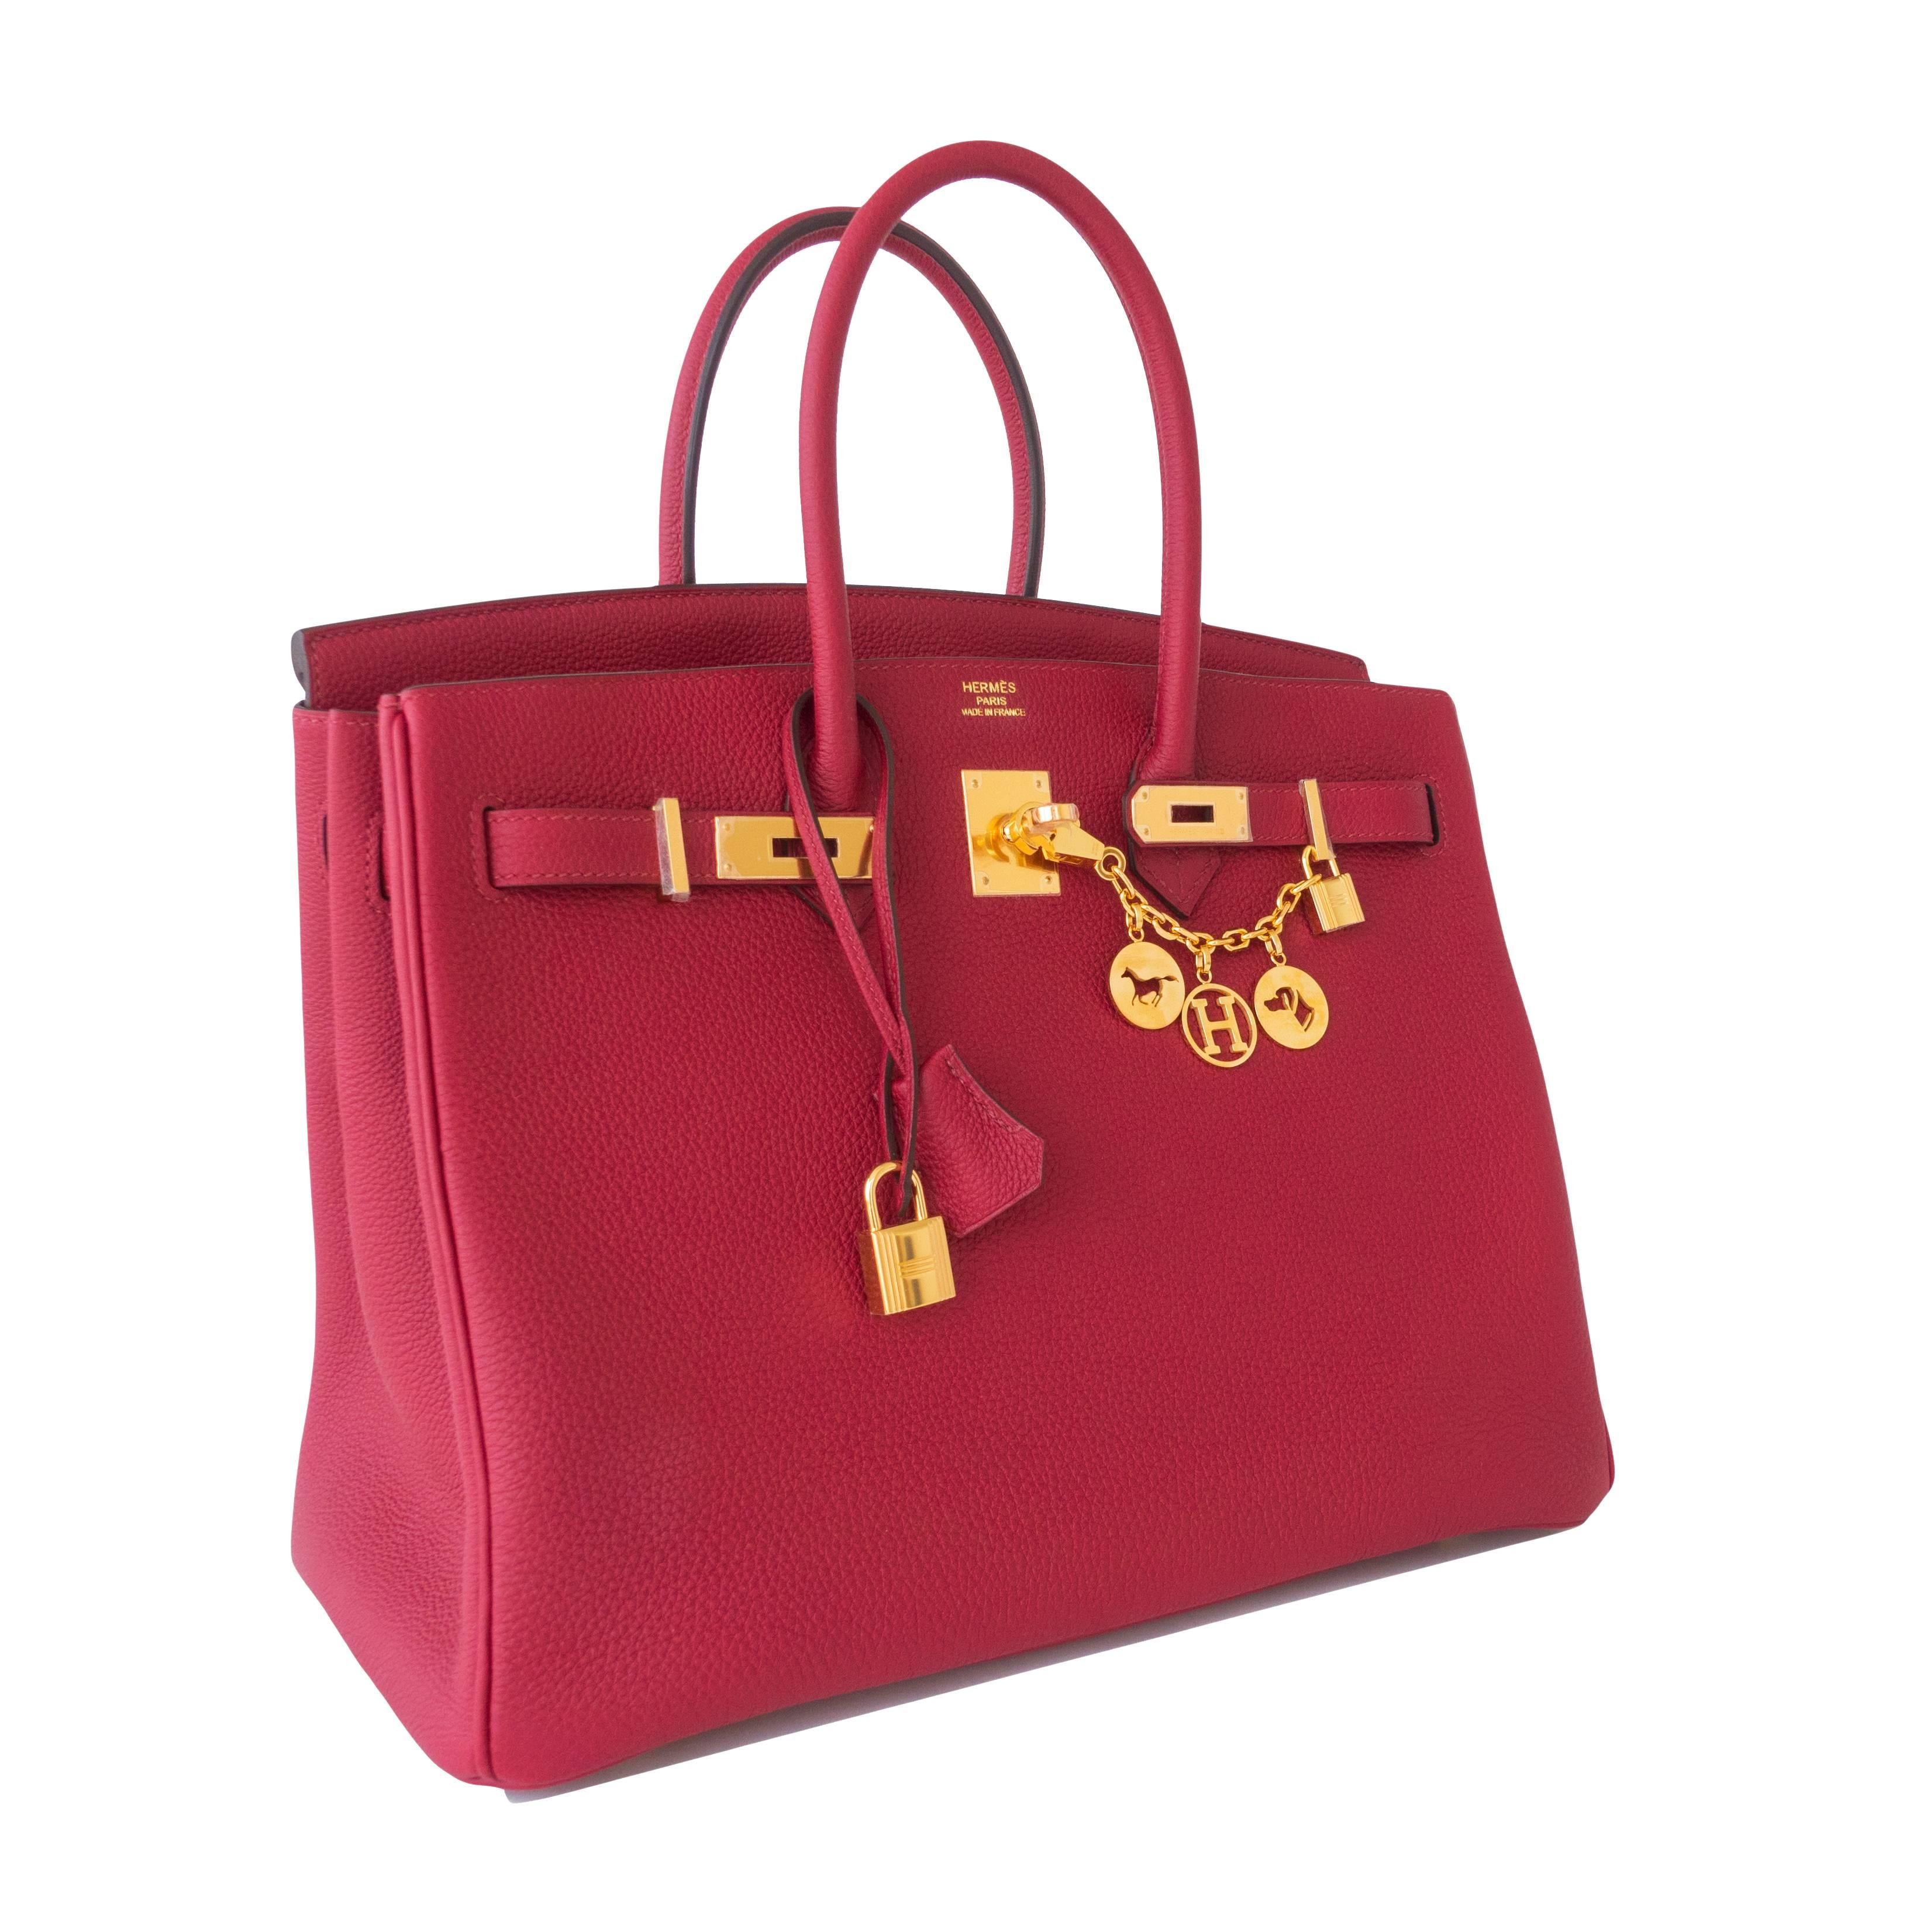 Hermes Rouge Grenat Red Togo 35cm Birkin Bag Gold Hardware GHW Exquisite
Store fresh. Pristine Condition. Fresh new 2016 bag with interior X stamp. 
Perfect gift! Comes in full set with lock, keys, clochette, sleeper, raincoat, and orange Hermes